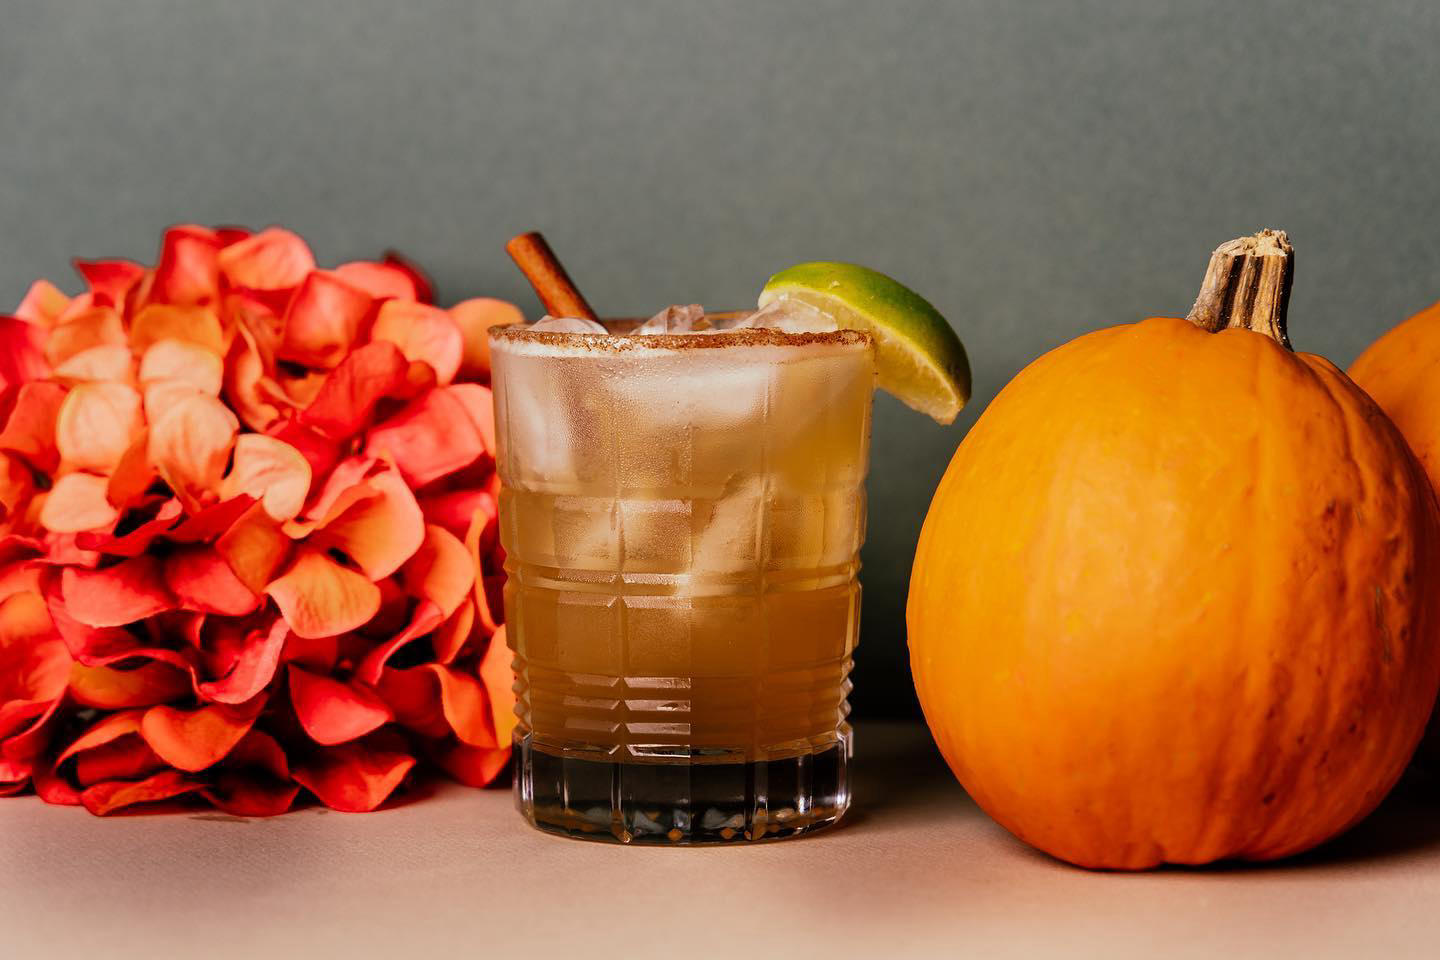 image  1 Hilton Cabana Miami Beach - Time to get spooky with this Halloween-inspired margarita